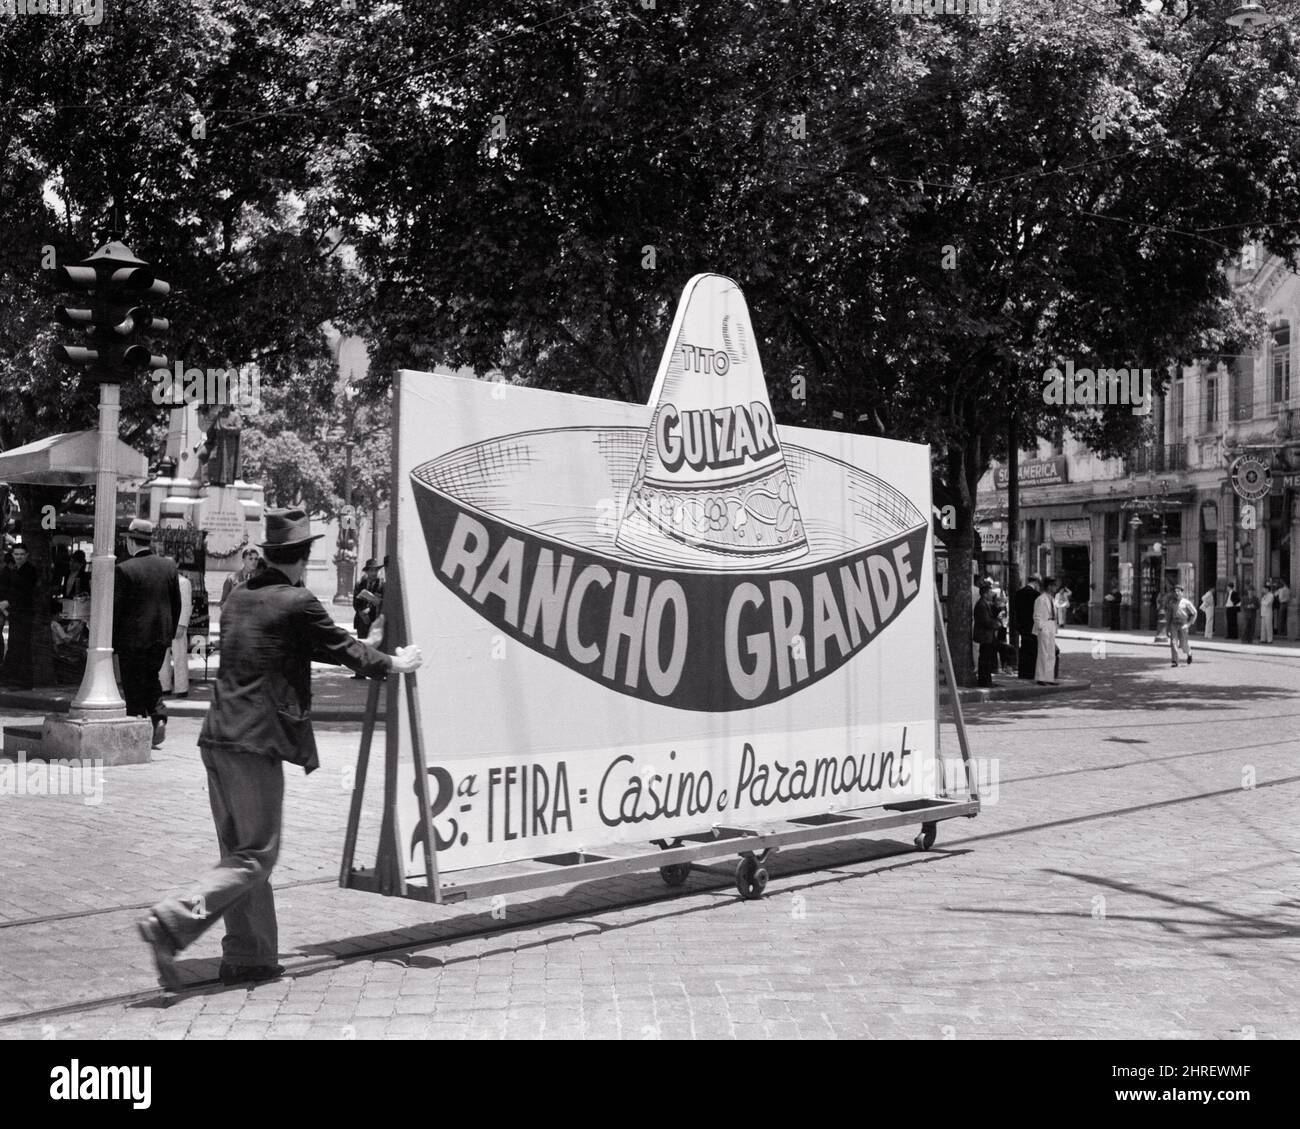 1930s 1940s MAN PUSHING BILLBOARD AD ON WHEELS FOR 1936 MOVIE RANCHO GRANDE TITO GUIZAR PLAYING PARAMOUNT CASINO SANTOS BRAZIL - r12377 PAL001 HARS MALES WHEELS ENTERTAINMENT MEXICAN B&W SOUTH AMERICA PERFORMING ARTS SKILL TEMPTATION OCCUPATION SKILLS ADVERTISEMENT LEISURE AD SOMBRERO RECREATION LABOR ON EMPLOYMENT OCCUPATIONS CONCEPTUAL GRANDE 1936 BRAZIL CASINO STYLISH INFRASTRUCTURE EMPLOYEE RELAXATION YOUNG ADULT MAN BLACK AND WHITE LABORING OLD FASHIONED Stock Photo